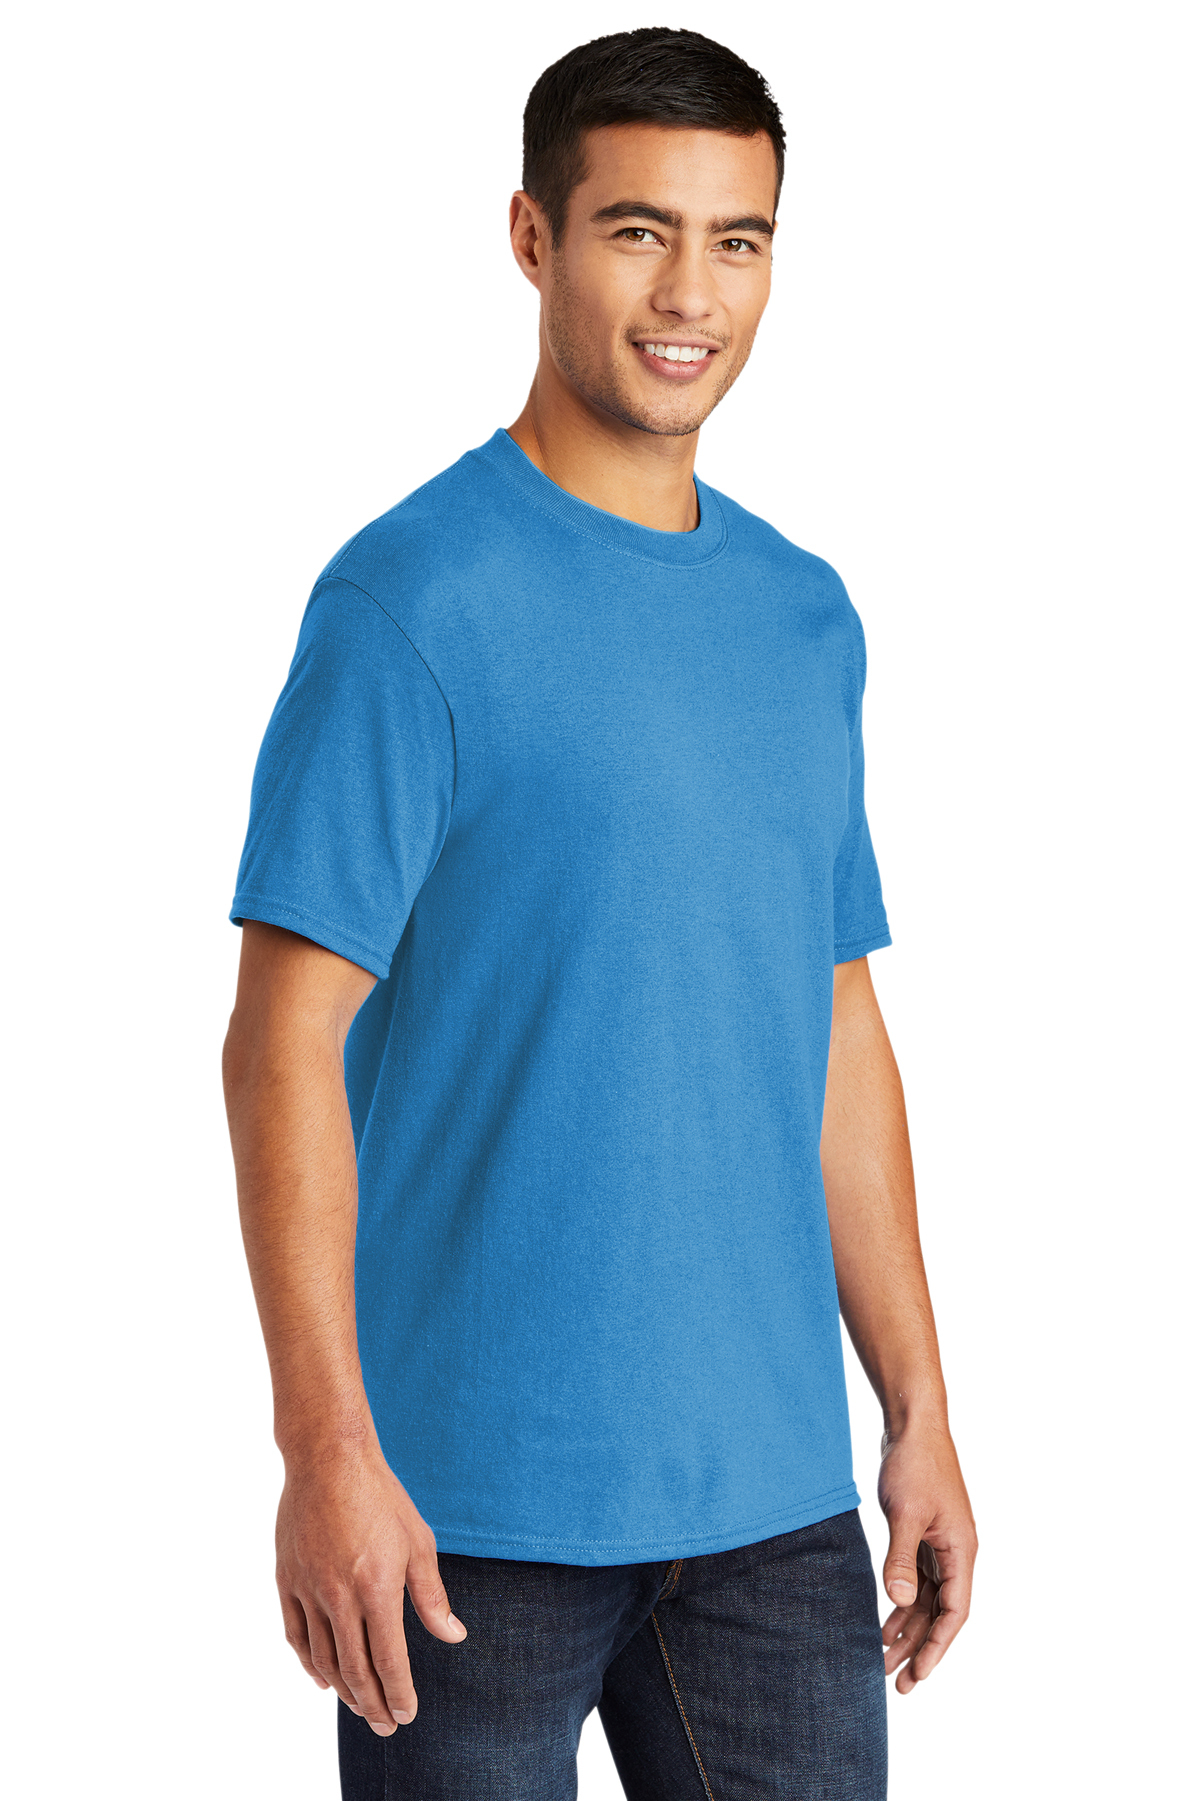 Port & Company Tall Core Blend Tee | Product | Company Casuals